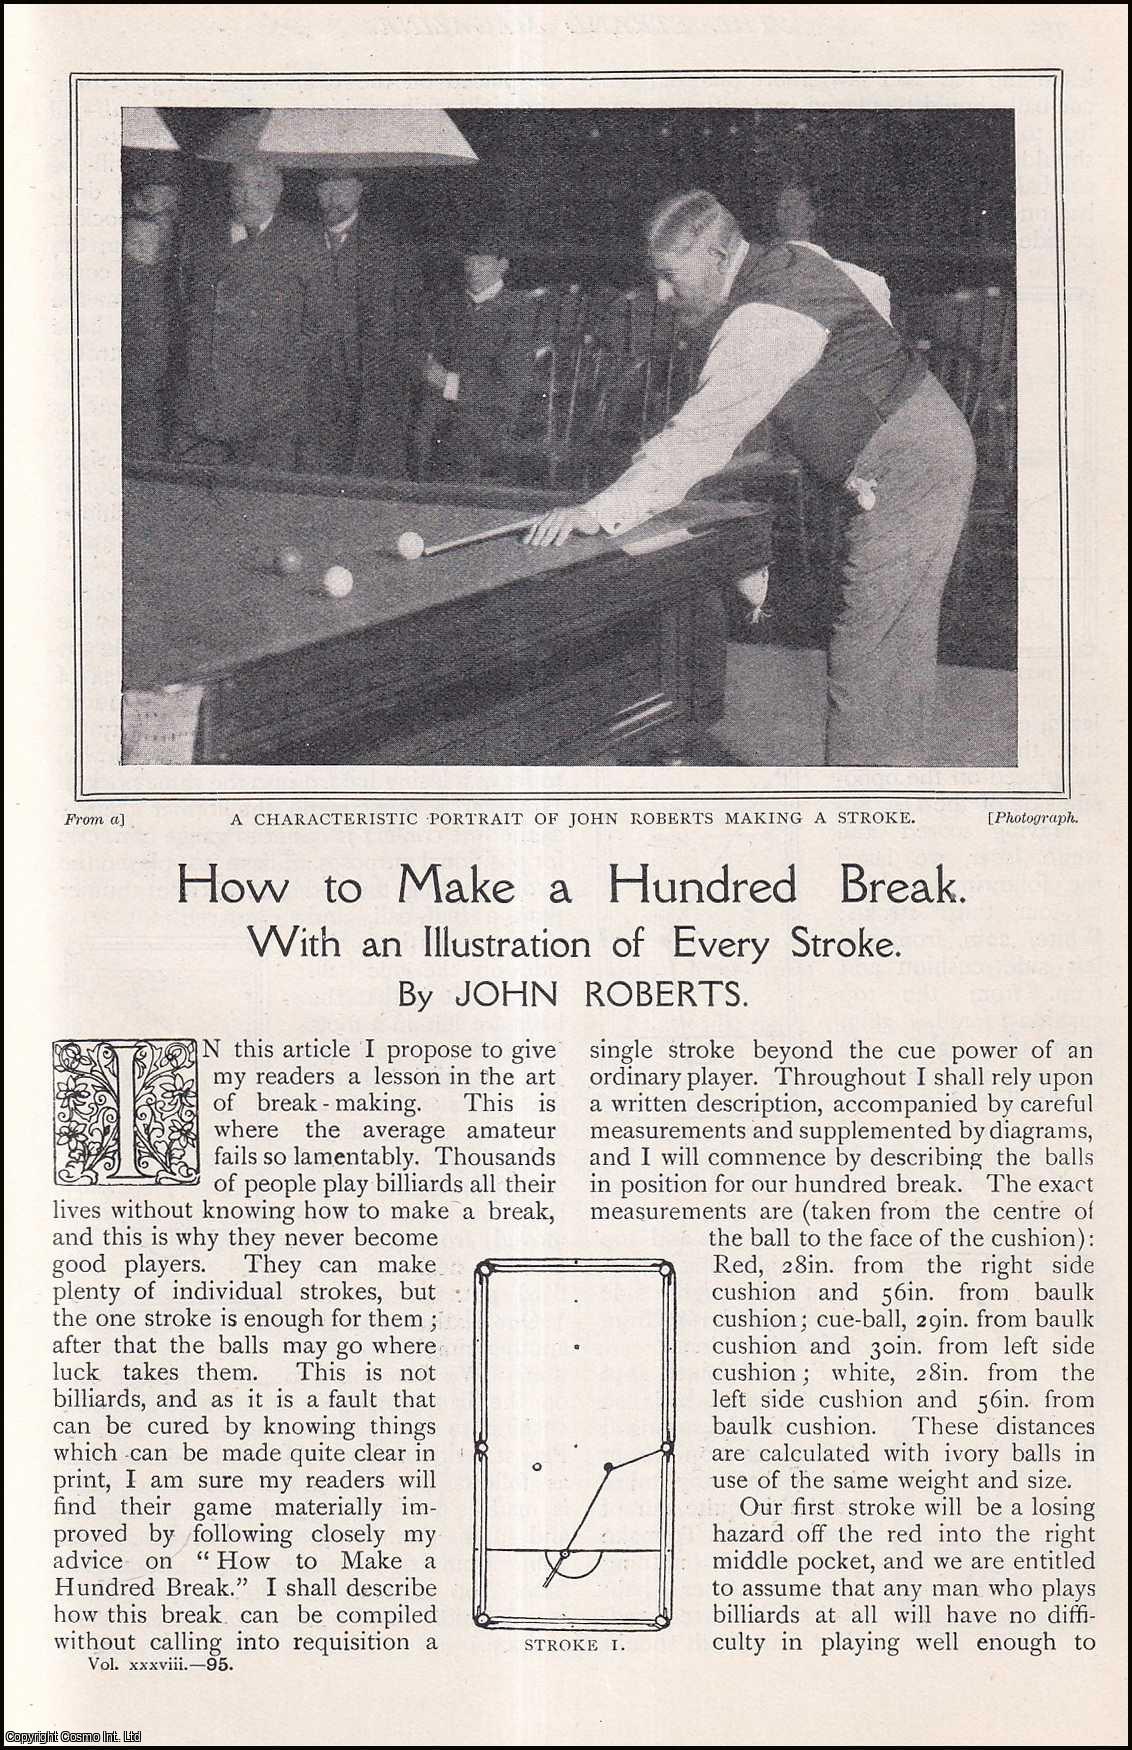 John Roberts - Billiards : how to make a hundred break. An uncommon original article from The Strand Magazine, 1909.